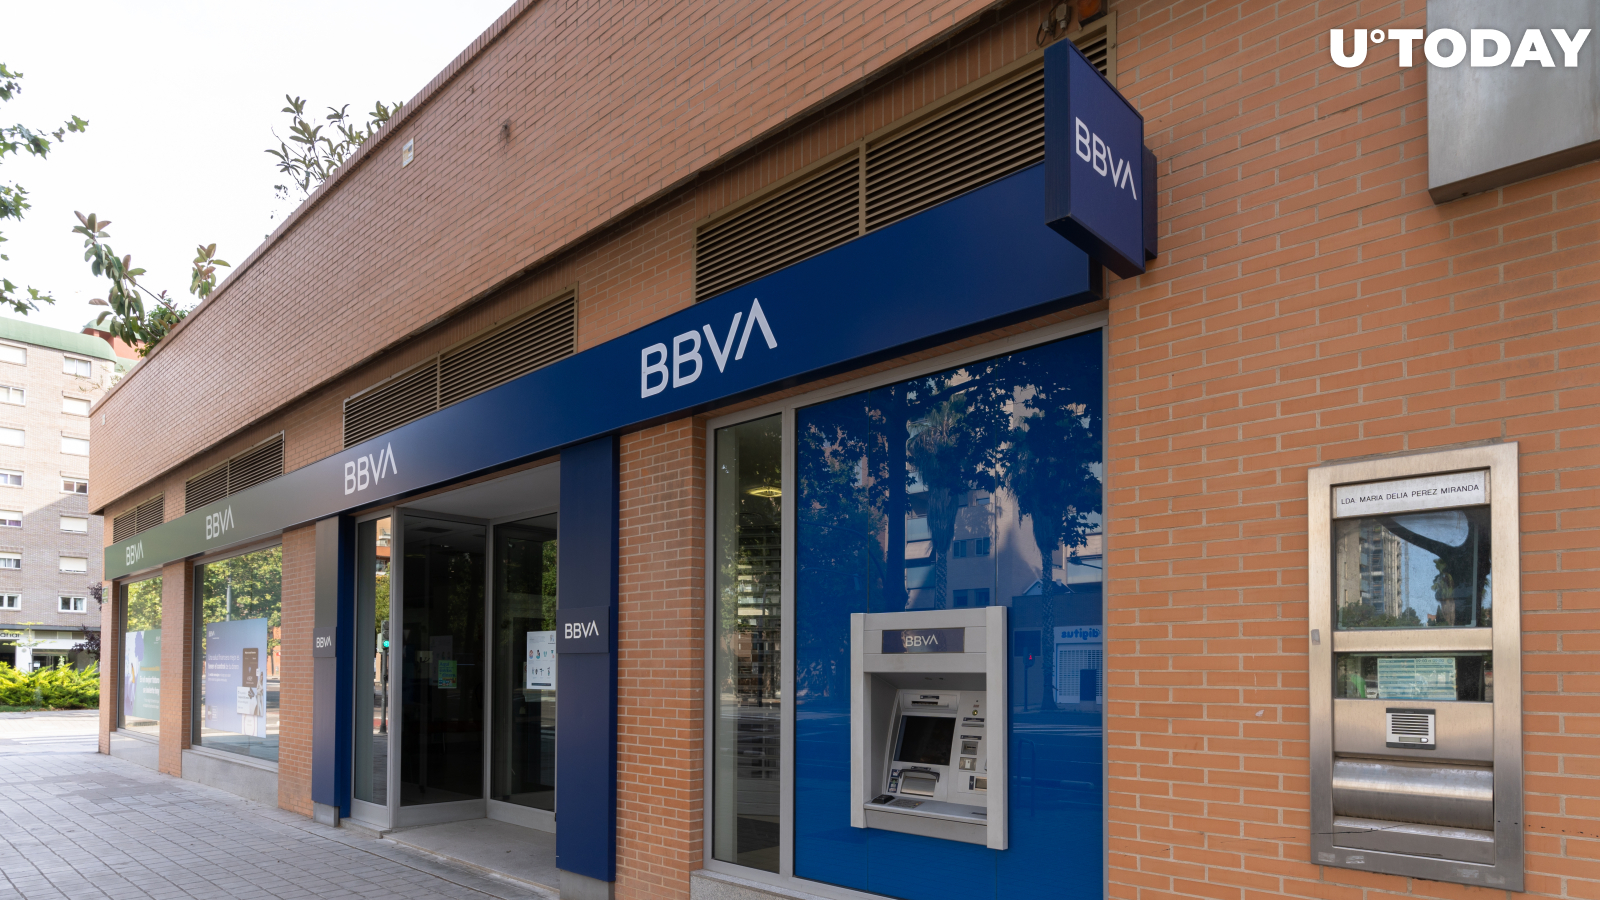 First Traditional Bank in Europe to Add Ether to Its Cryptocurrency Services